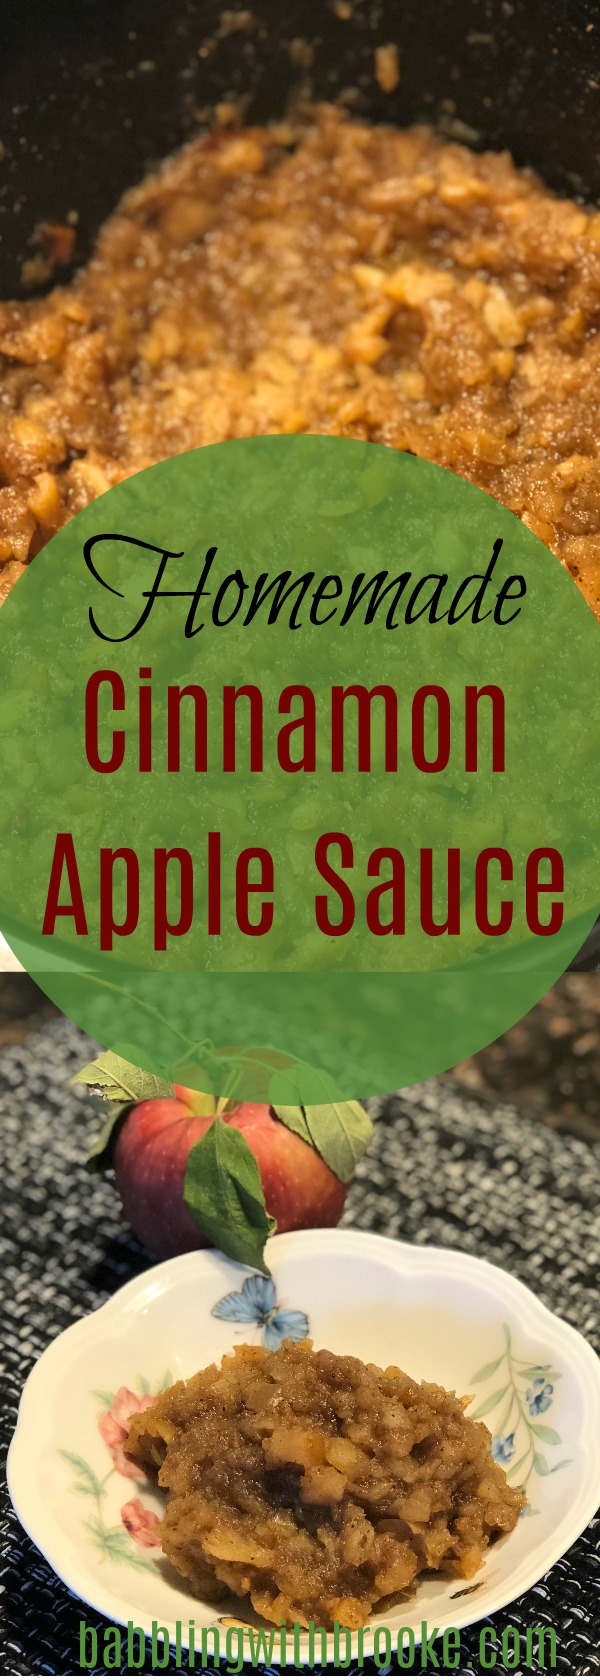 This delicious homemade cinnamon apple sauce recipe is so easy to make and perfect for Fall! It can be made in the crockpot and done in a couple of hours. It is perfect to bring to family get togethers and to warm you up on a cool Fall day! #homemadeapplesauce #applerecipes #cinnamonapples 